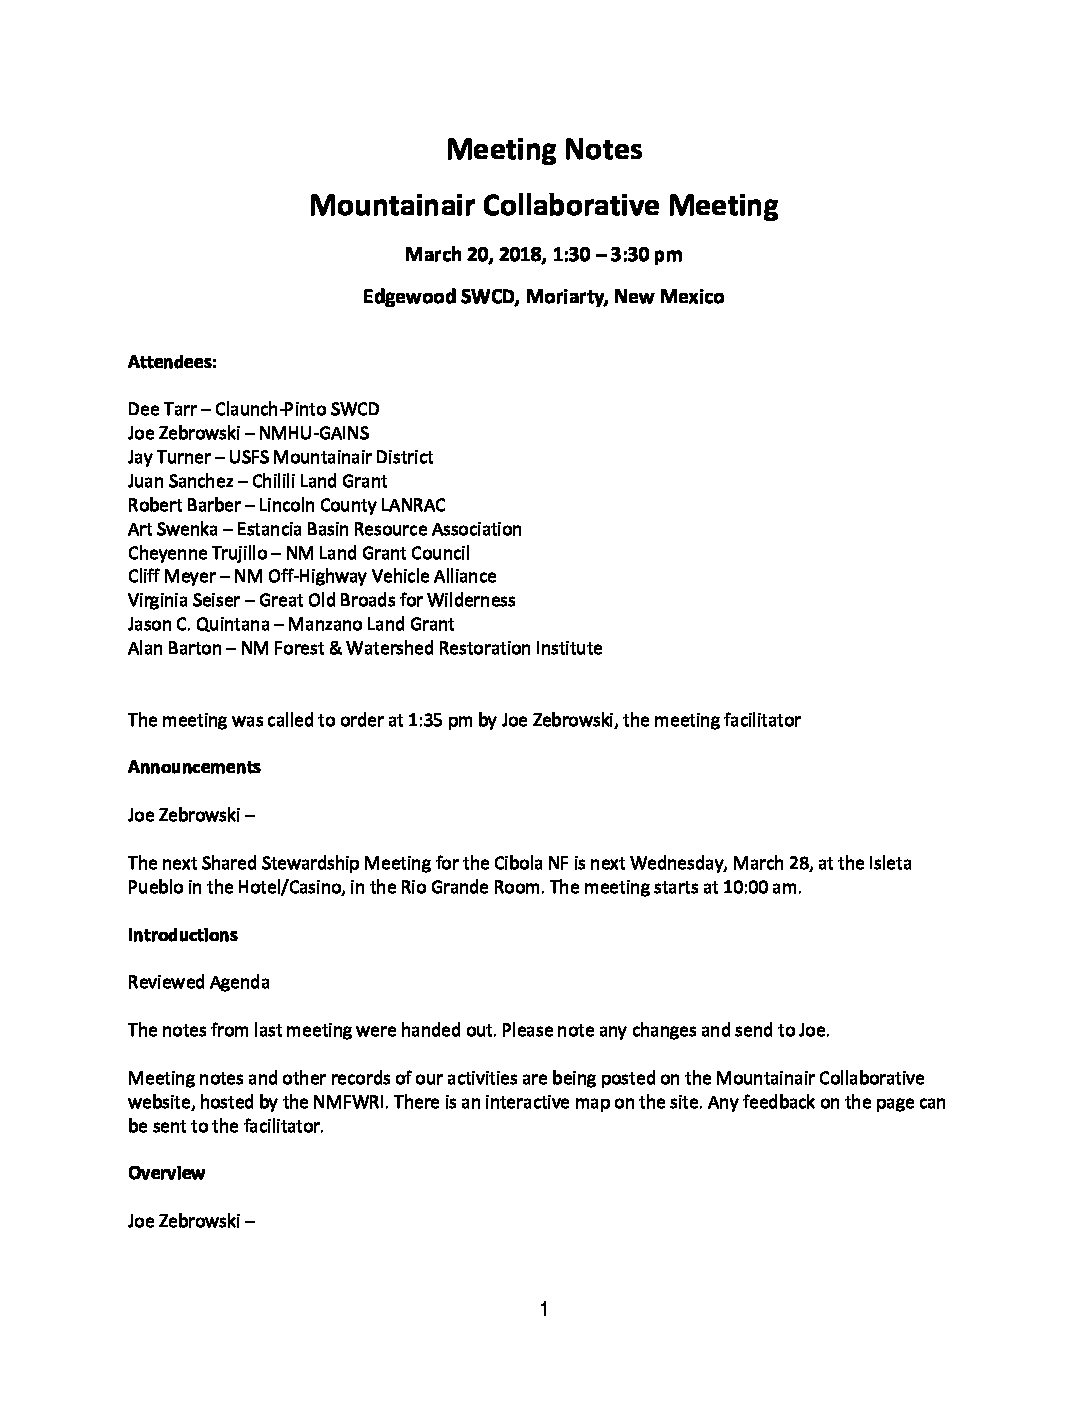 Meeting Notes March 20, 2018